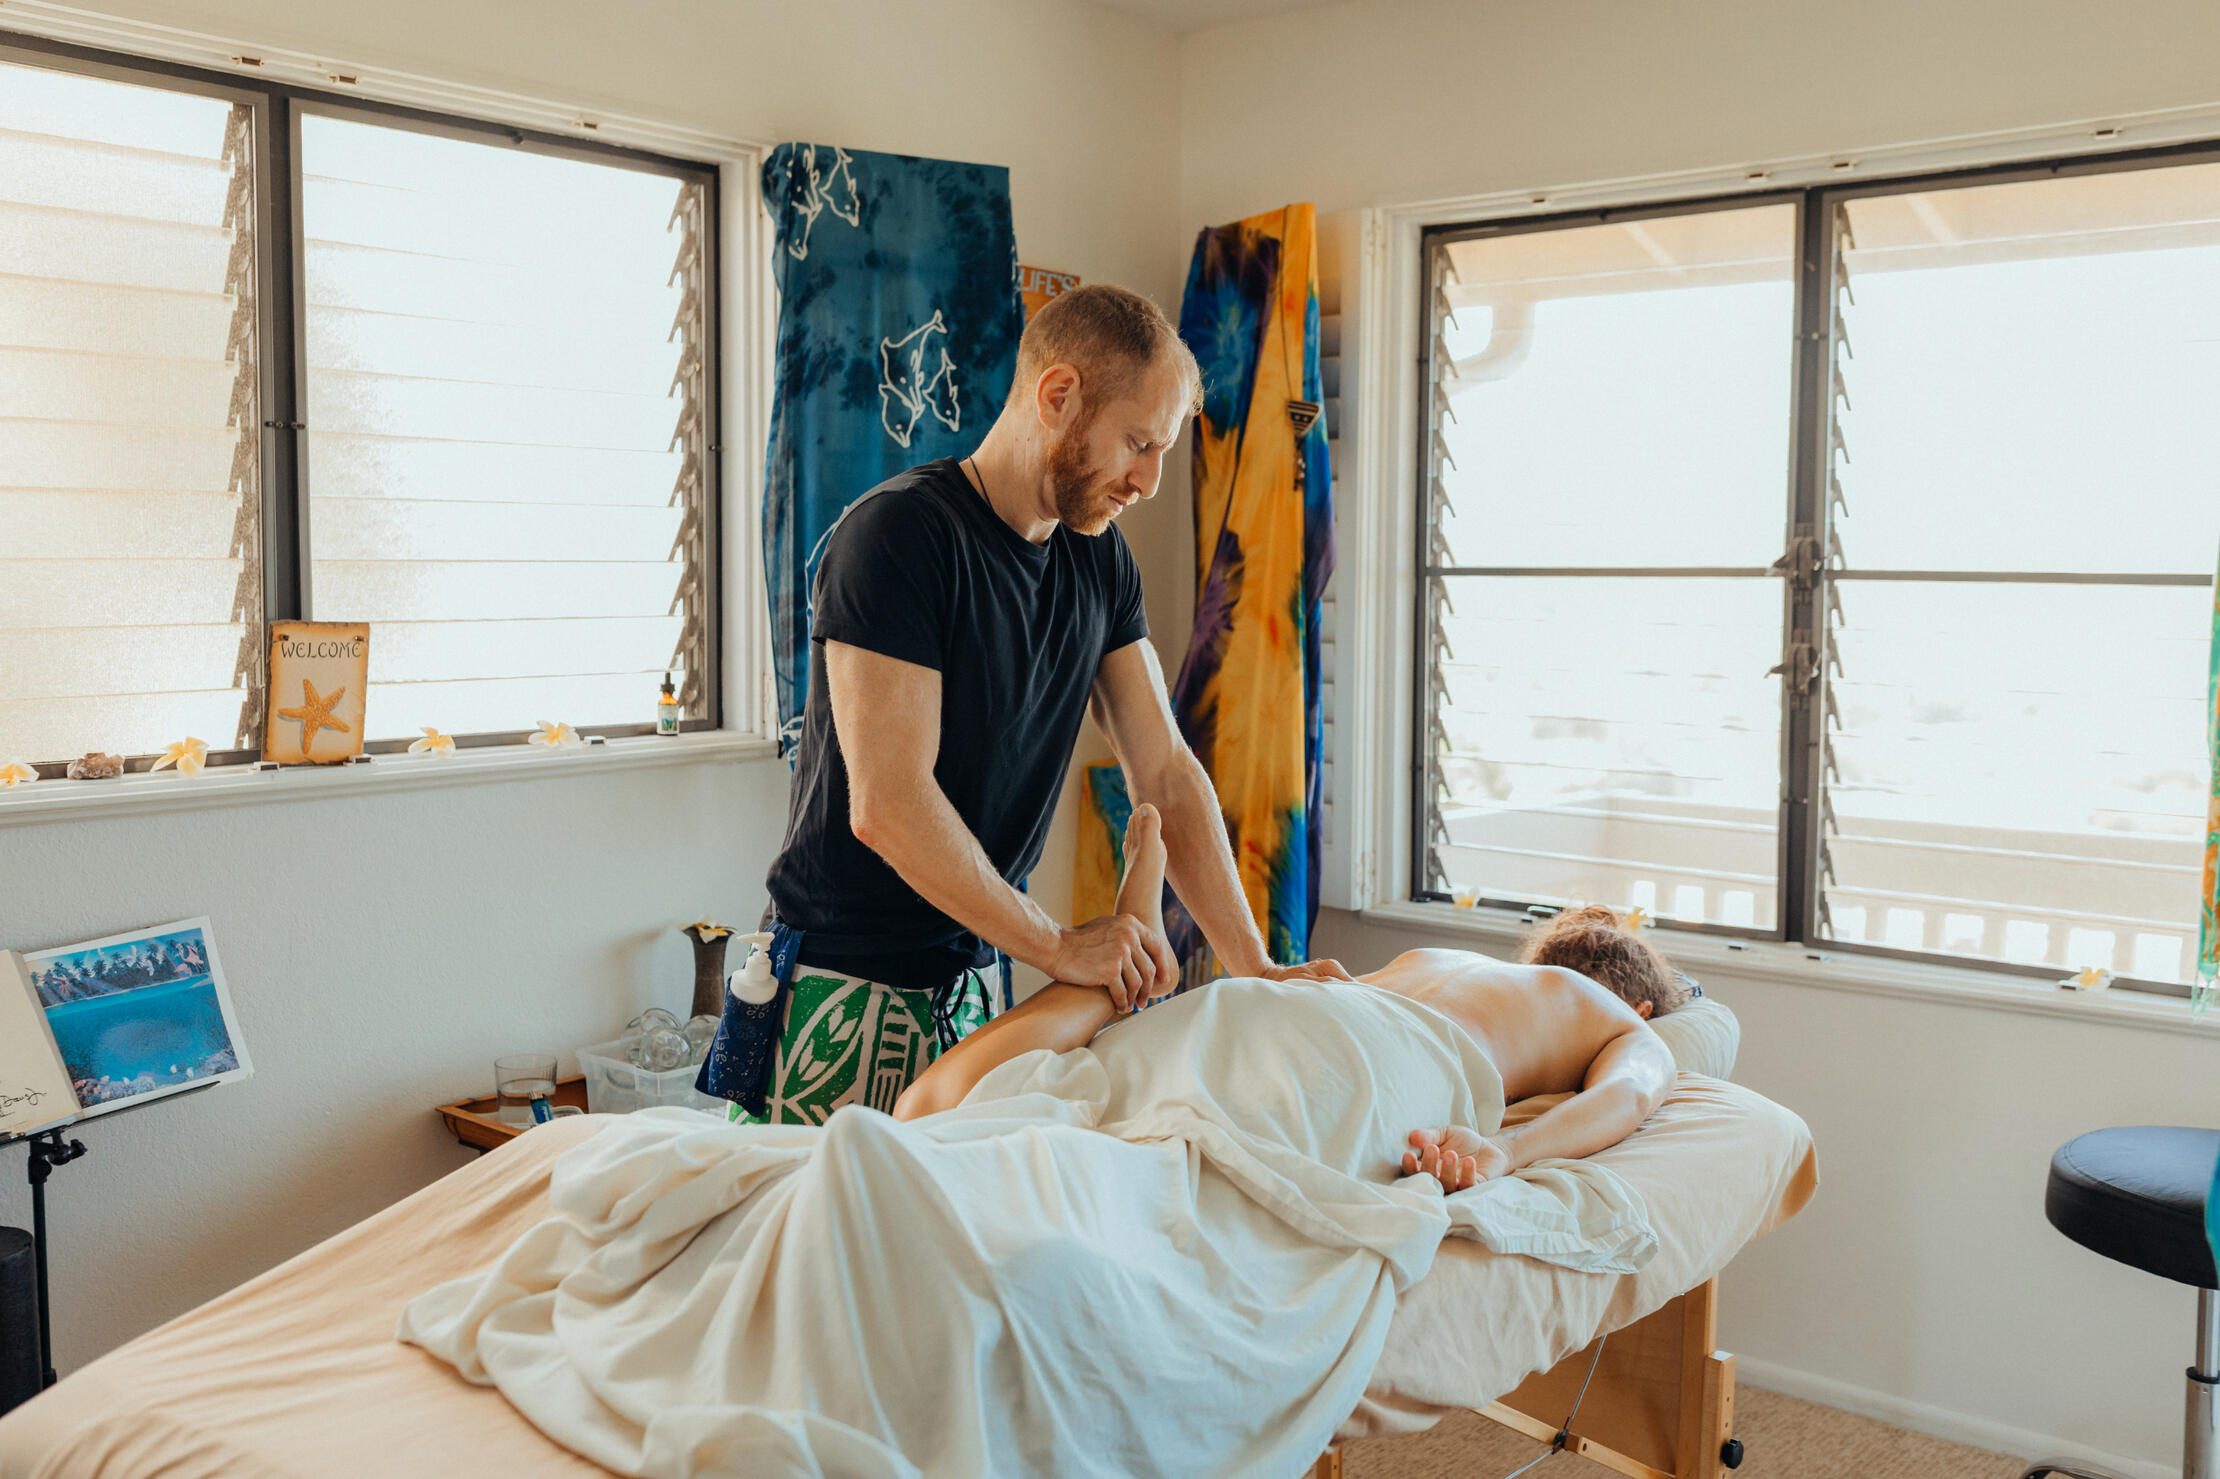 A peaceful picture of Jay from Mokulua Massage massaging a client.